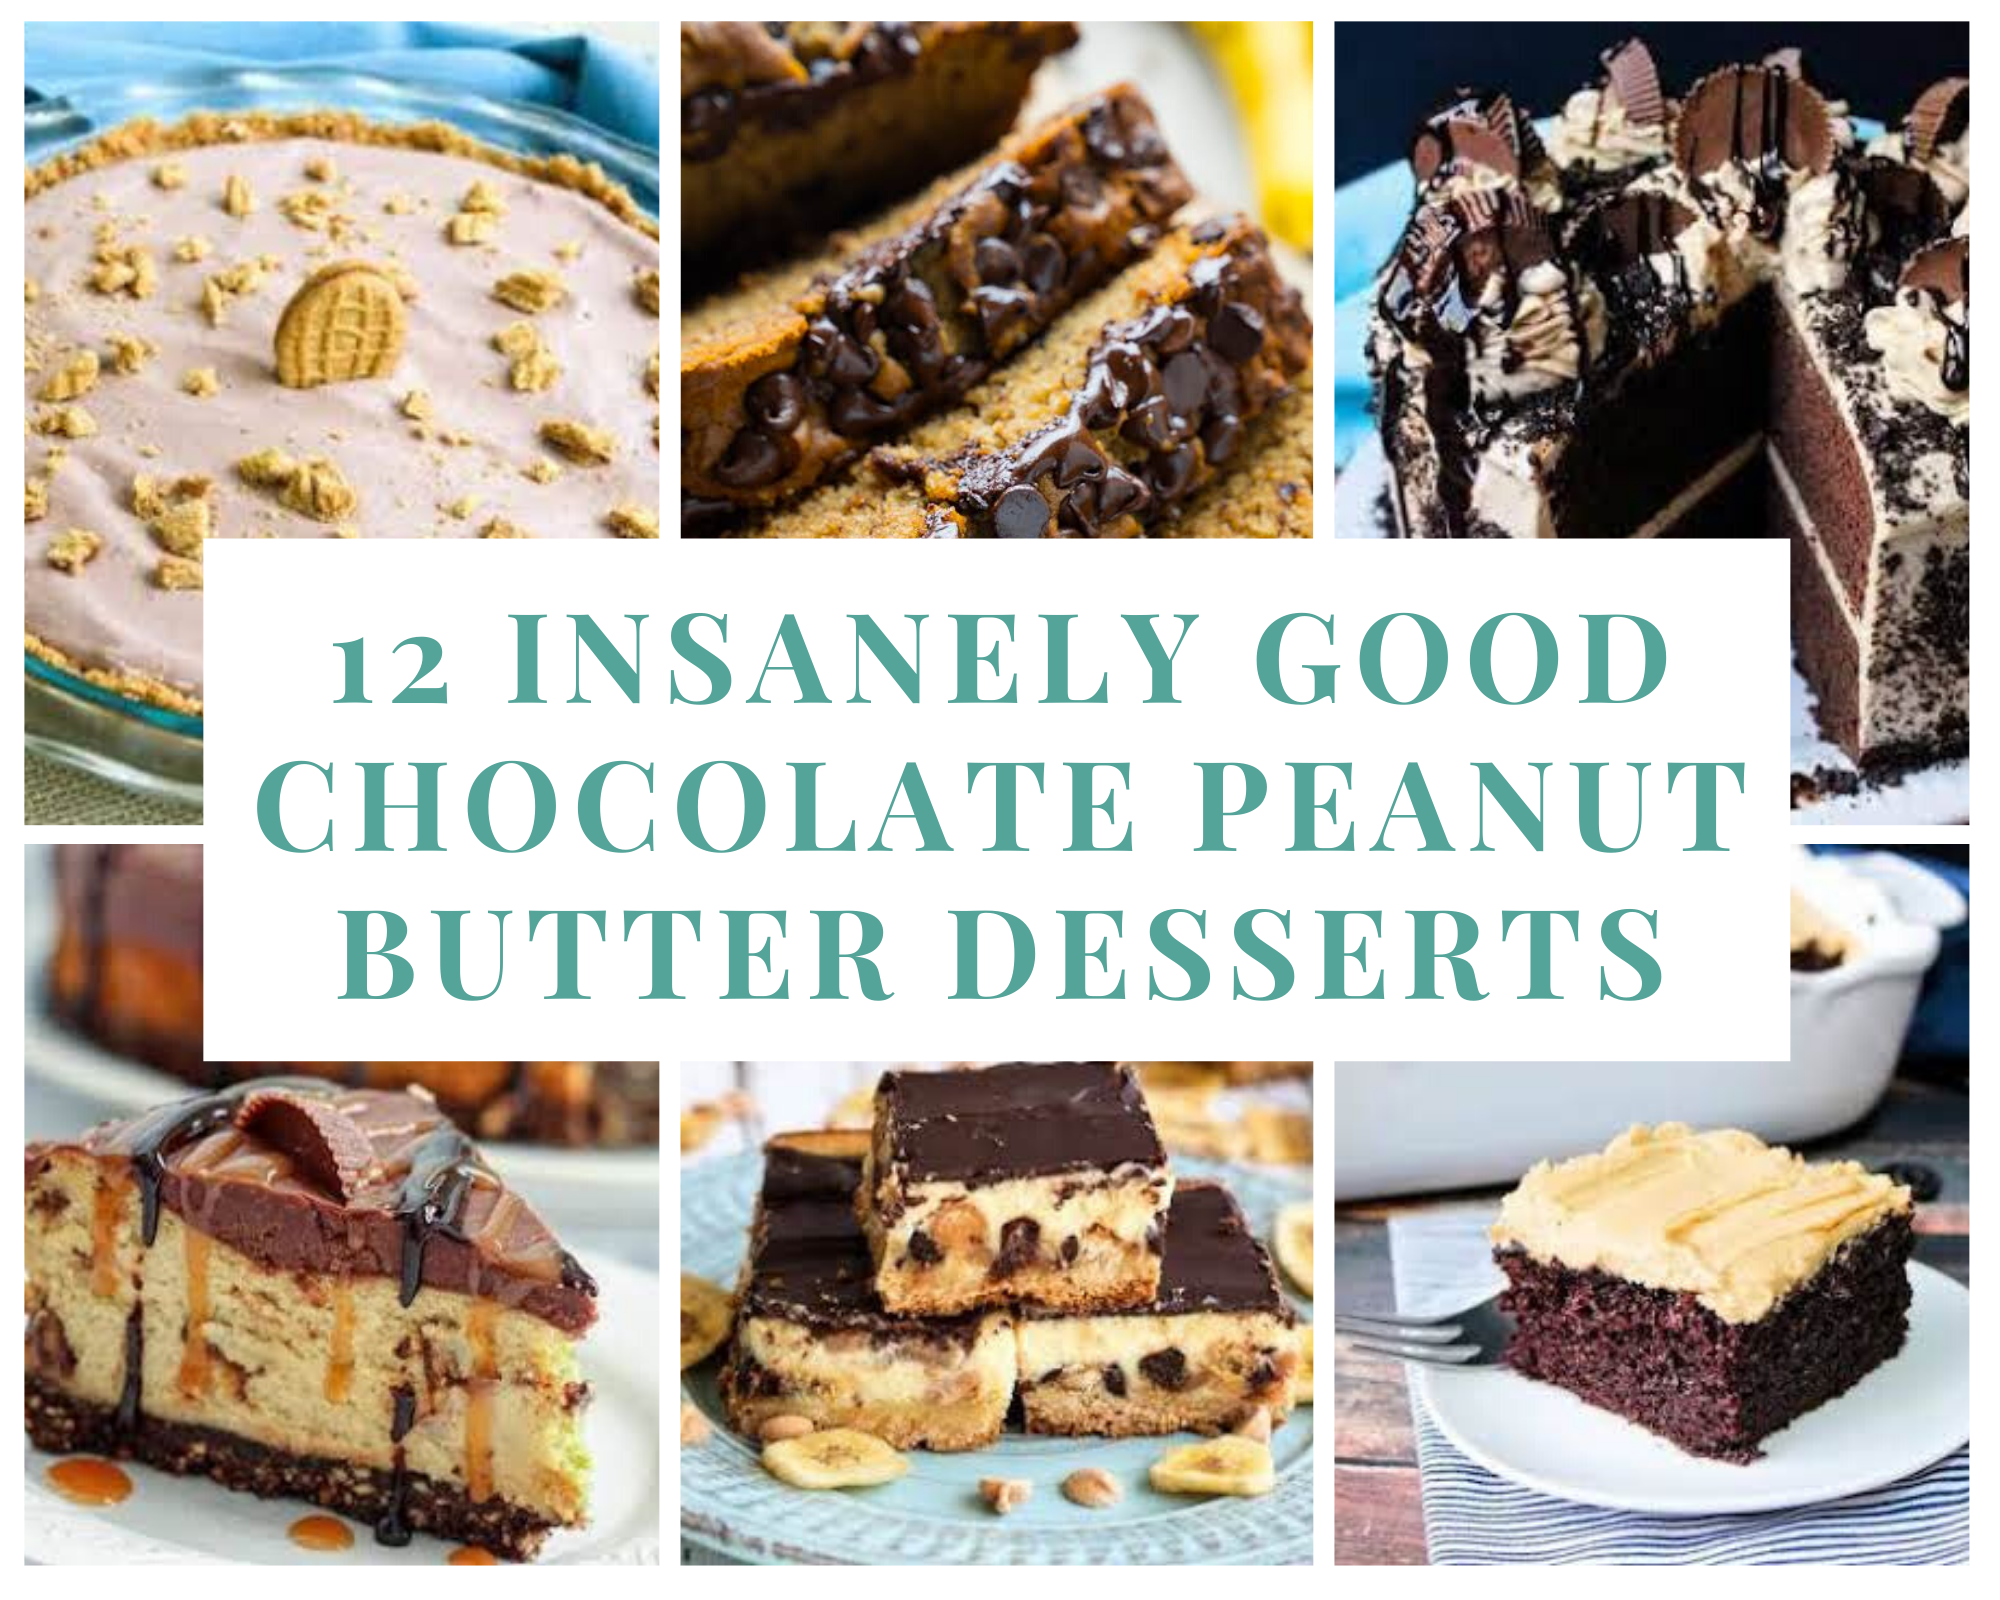 Peanut butter chocolate pies, cakes, breads and more